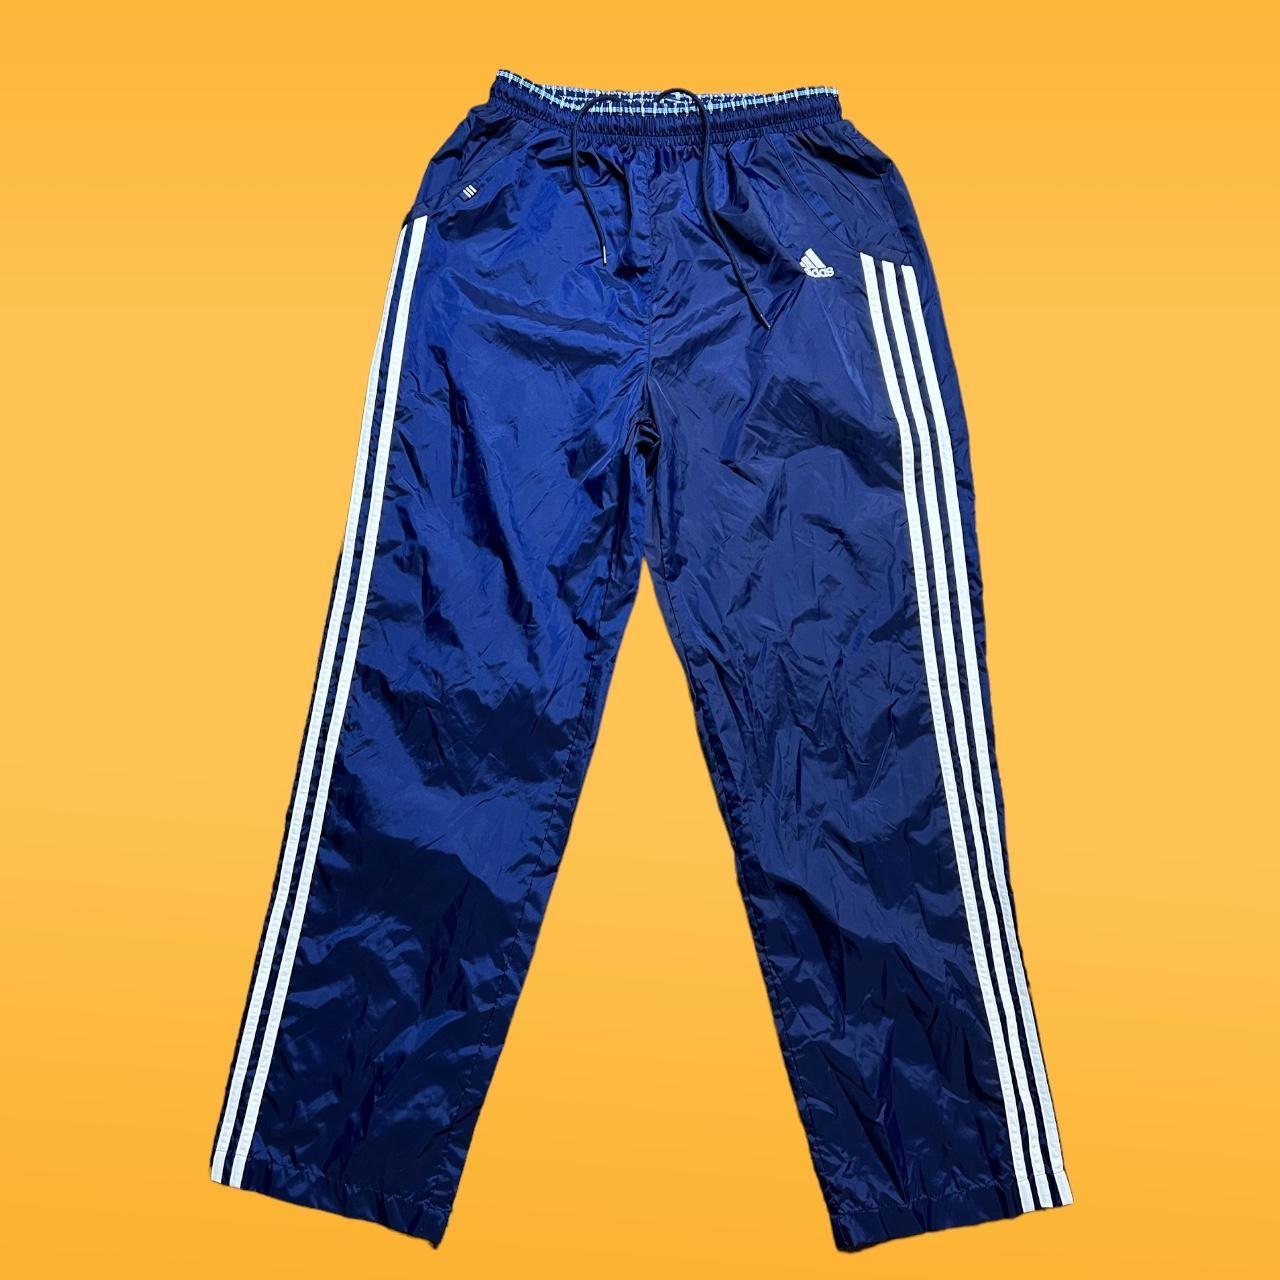 Vintage 90s adidas wind pant. Like new condition, - Depop